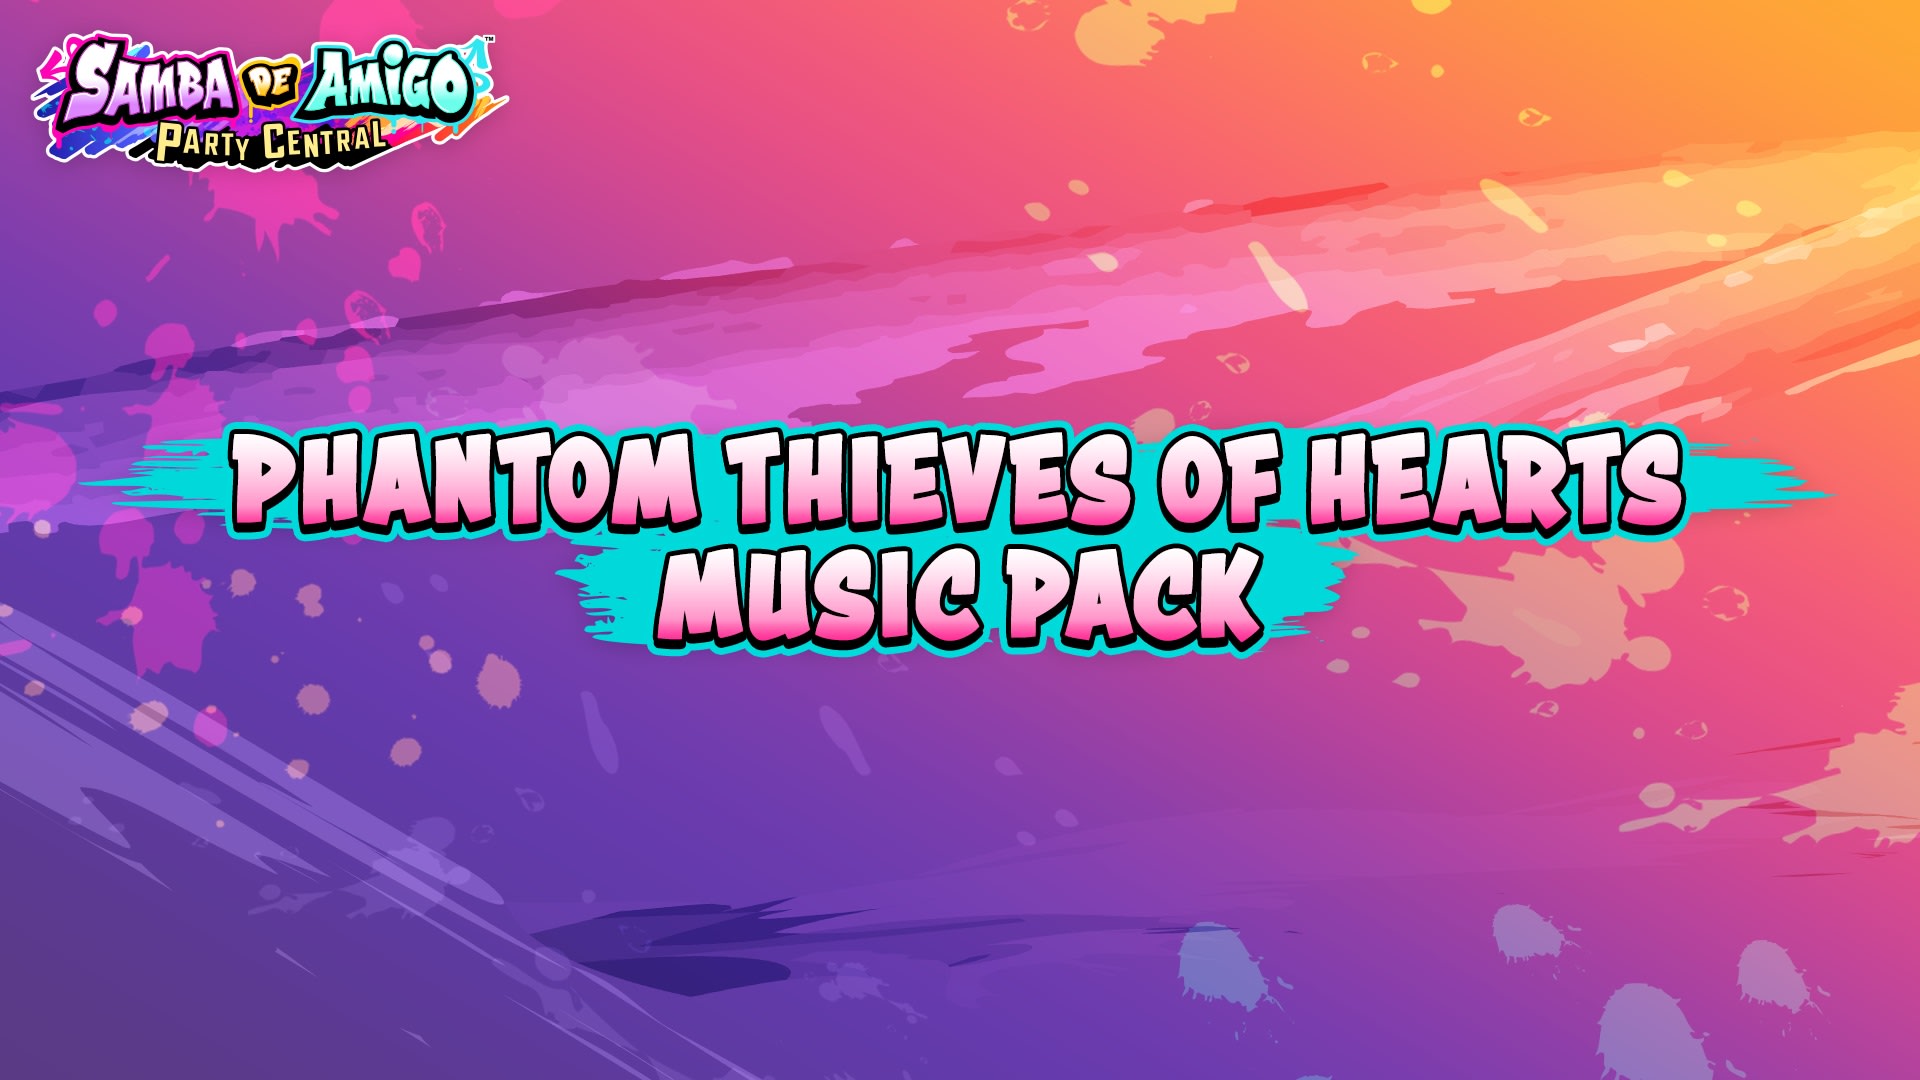 Pack musical Phantom Thieves of Hearts